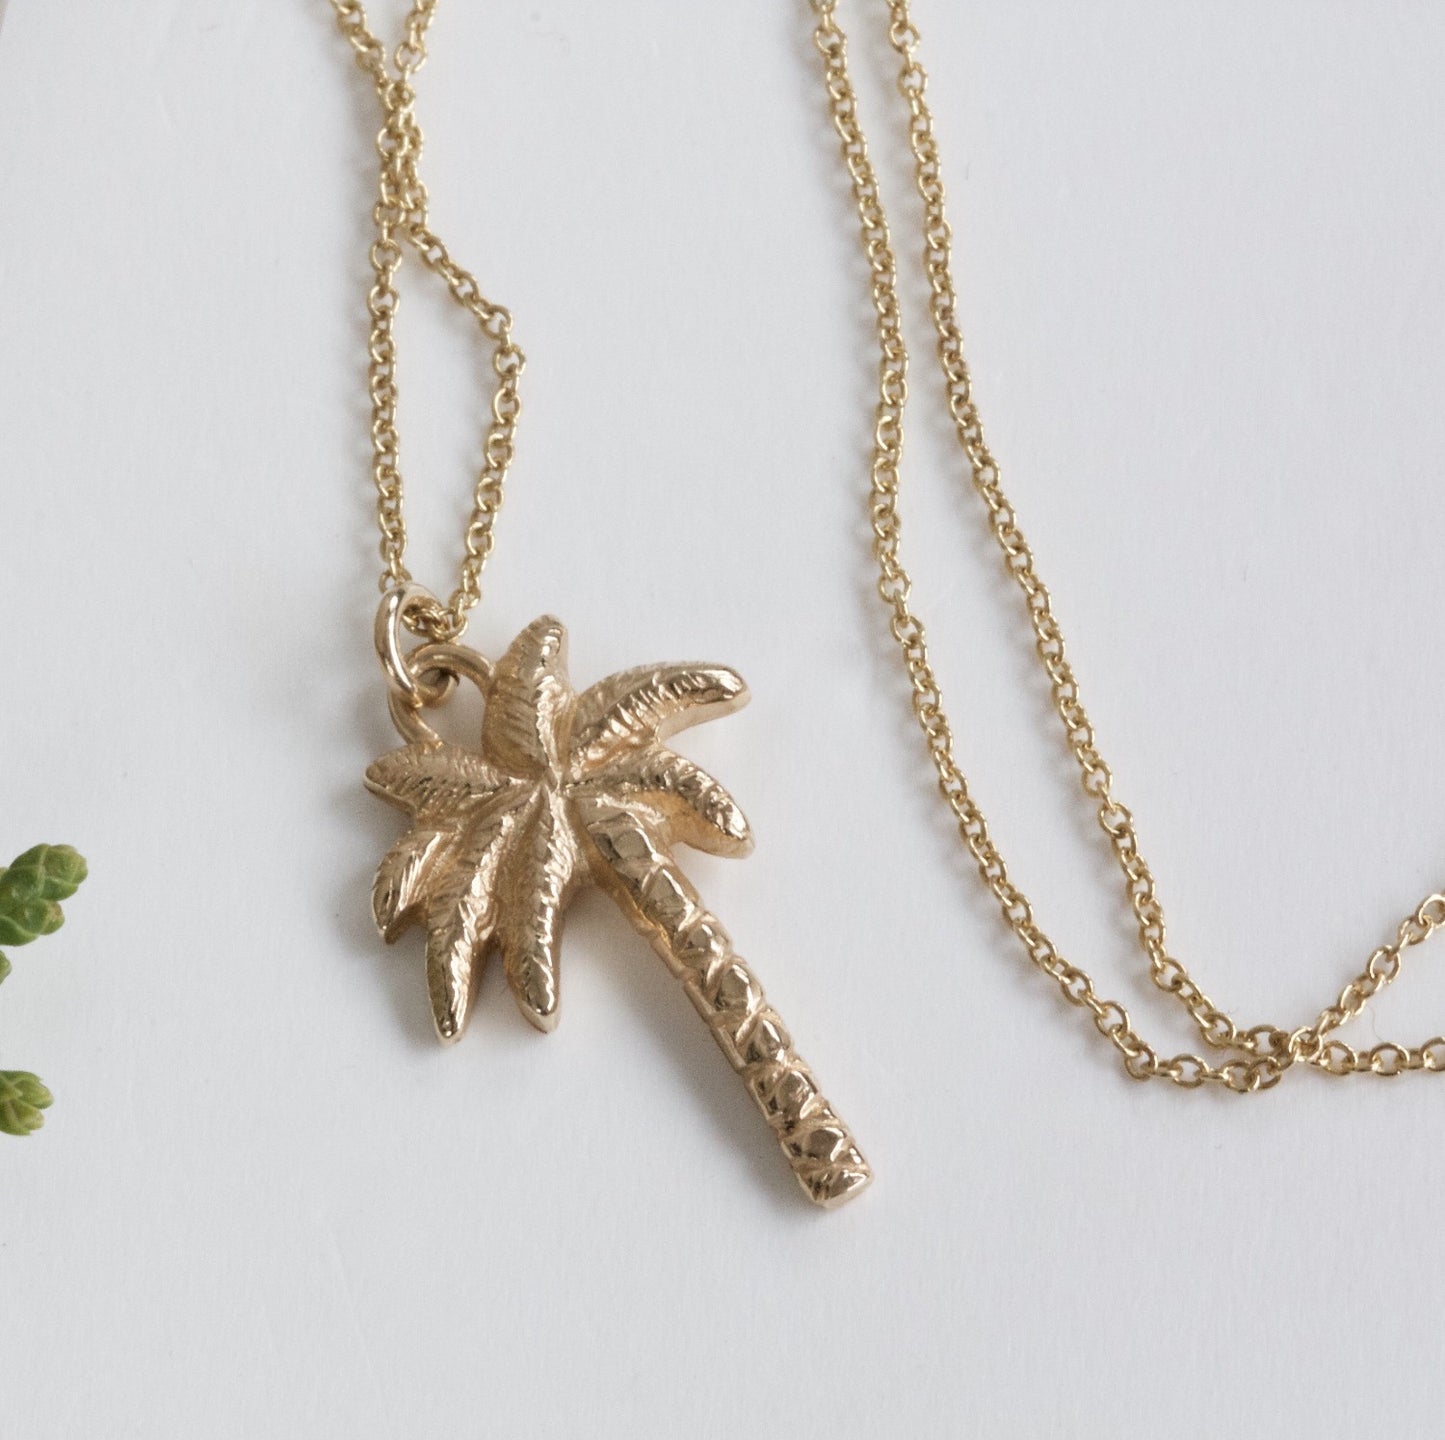 9ct gold palm tree necklace